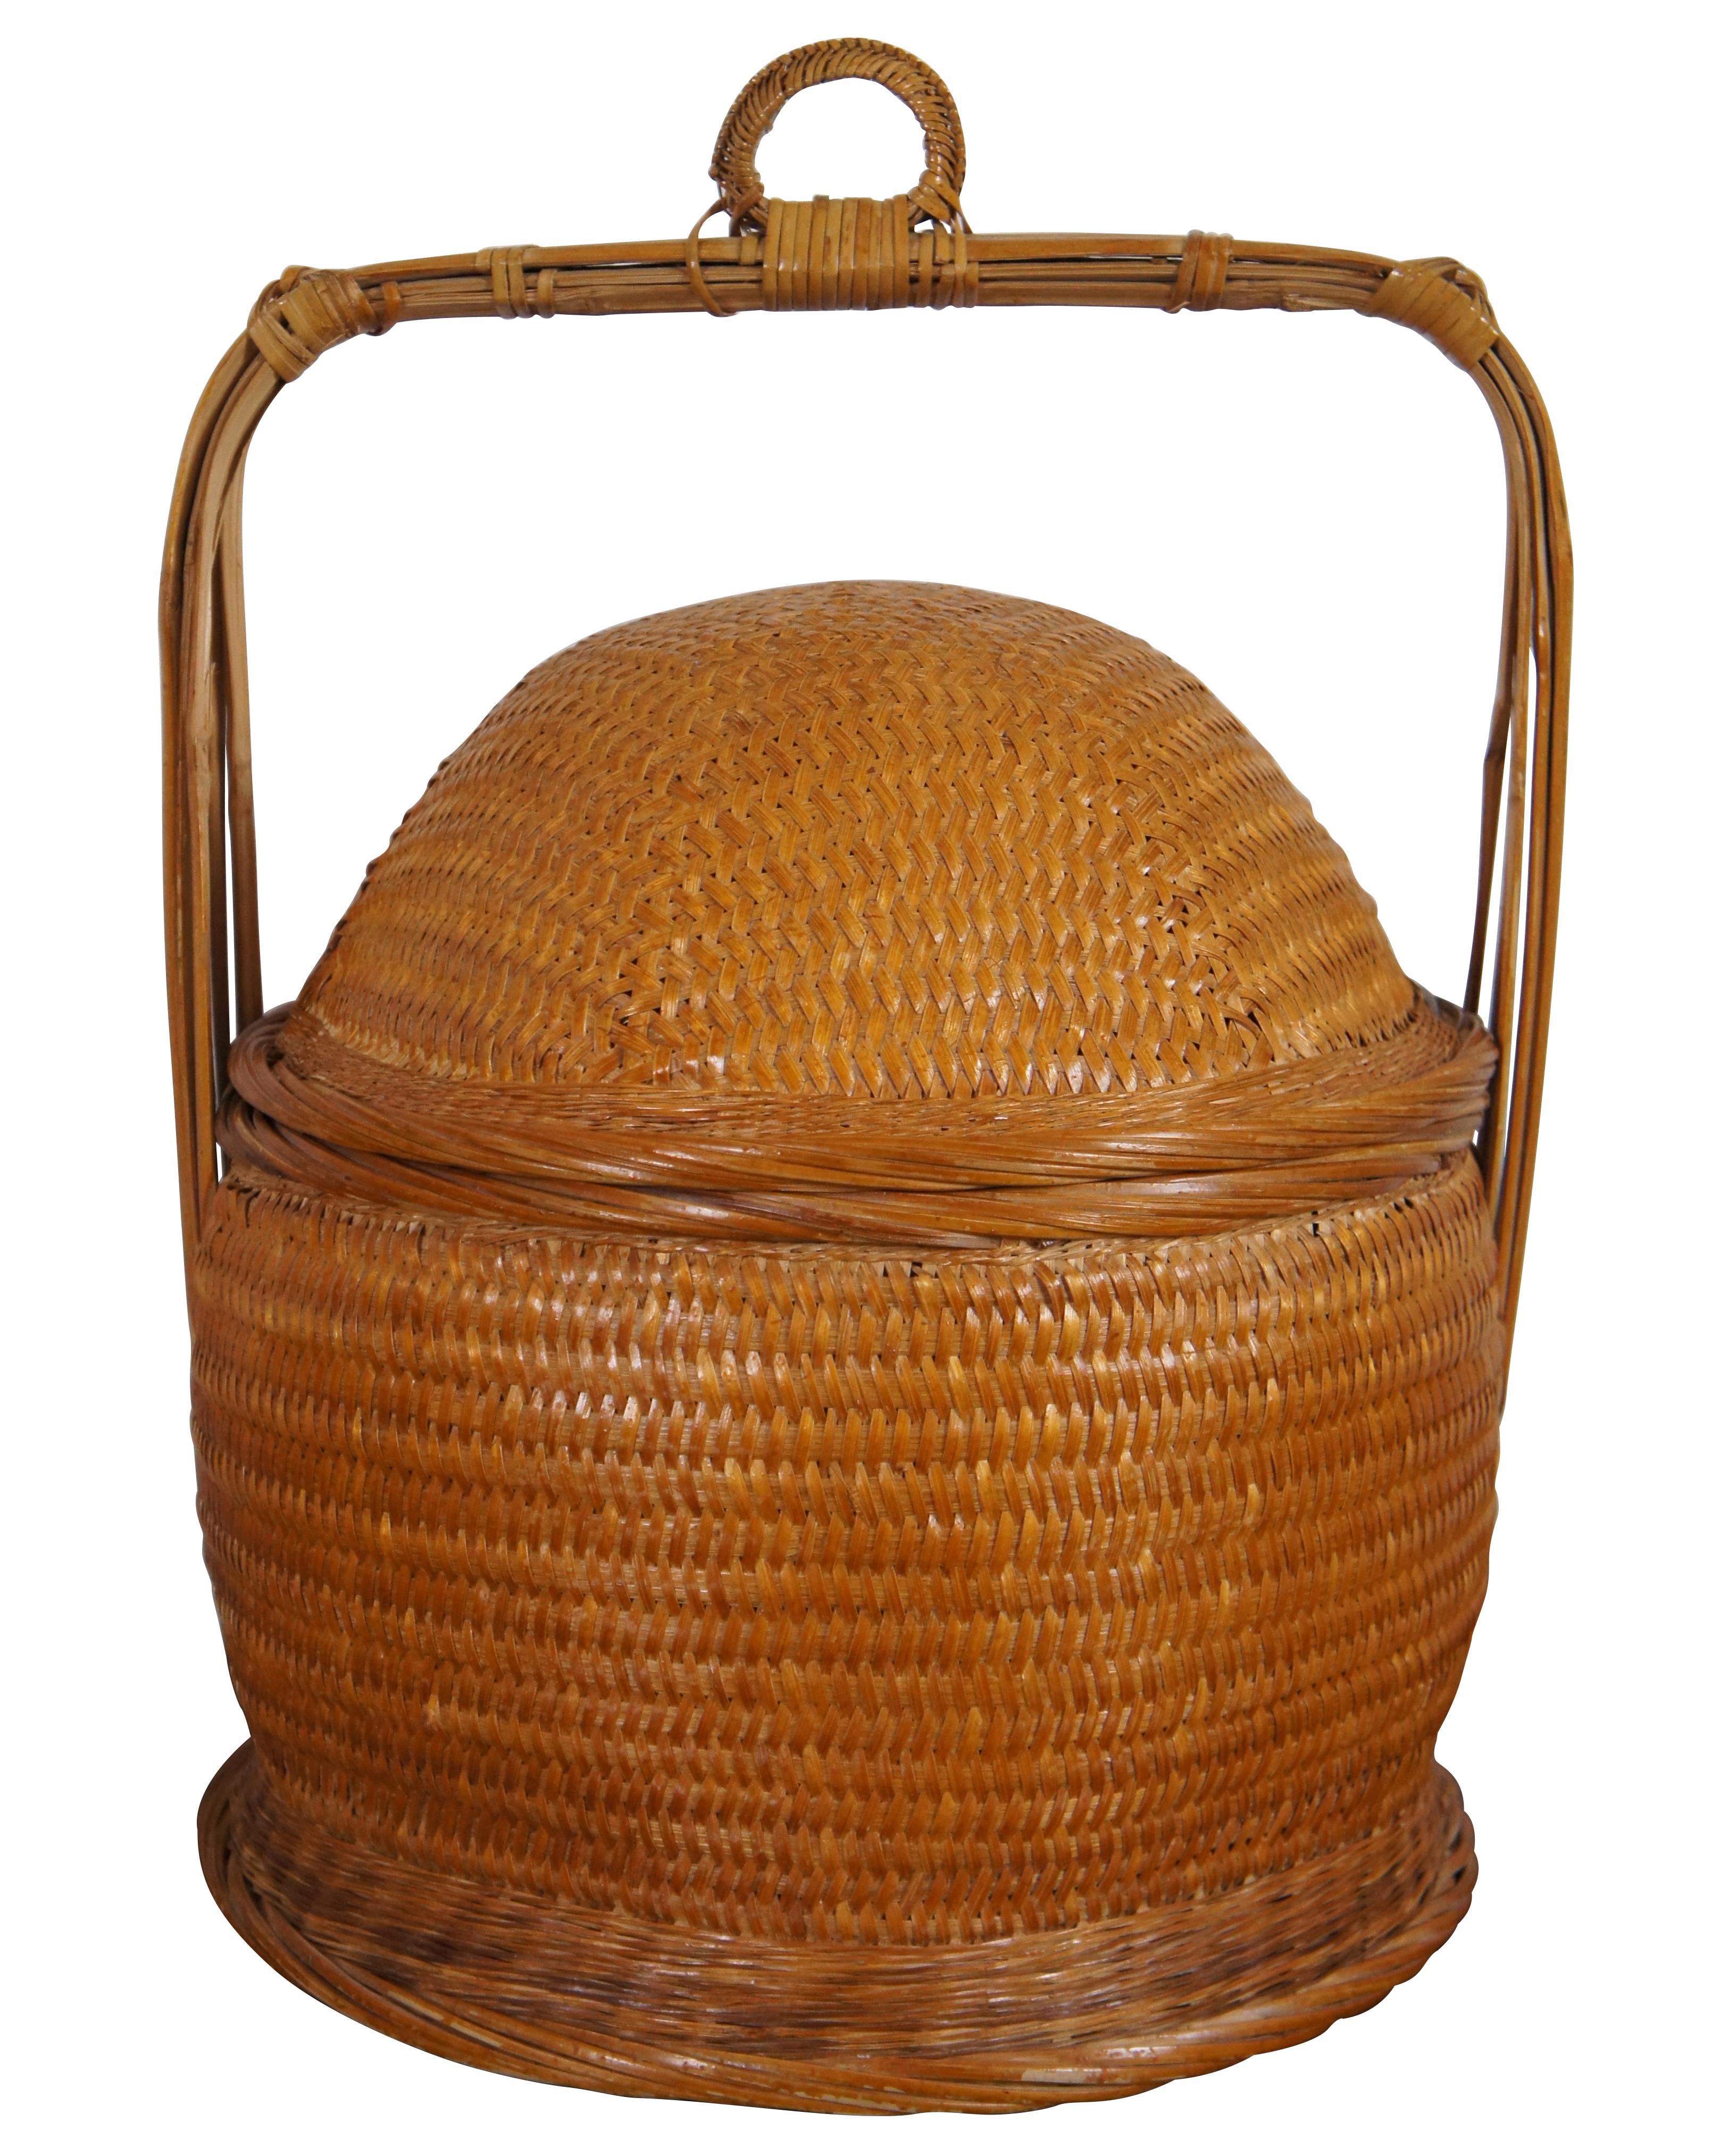 Chinoiserie 2 Vintage Chinese Wicker Rattan Stacking Tiered Lidded Wedding Baskets